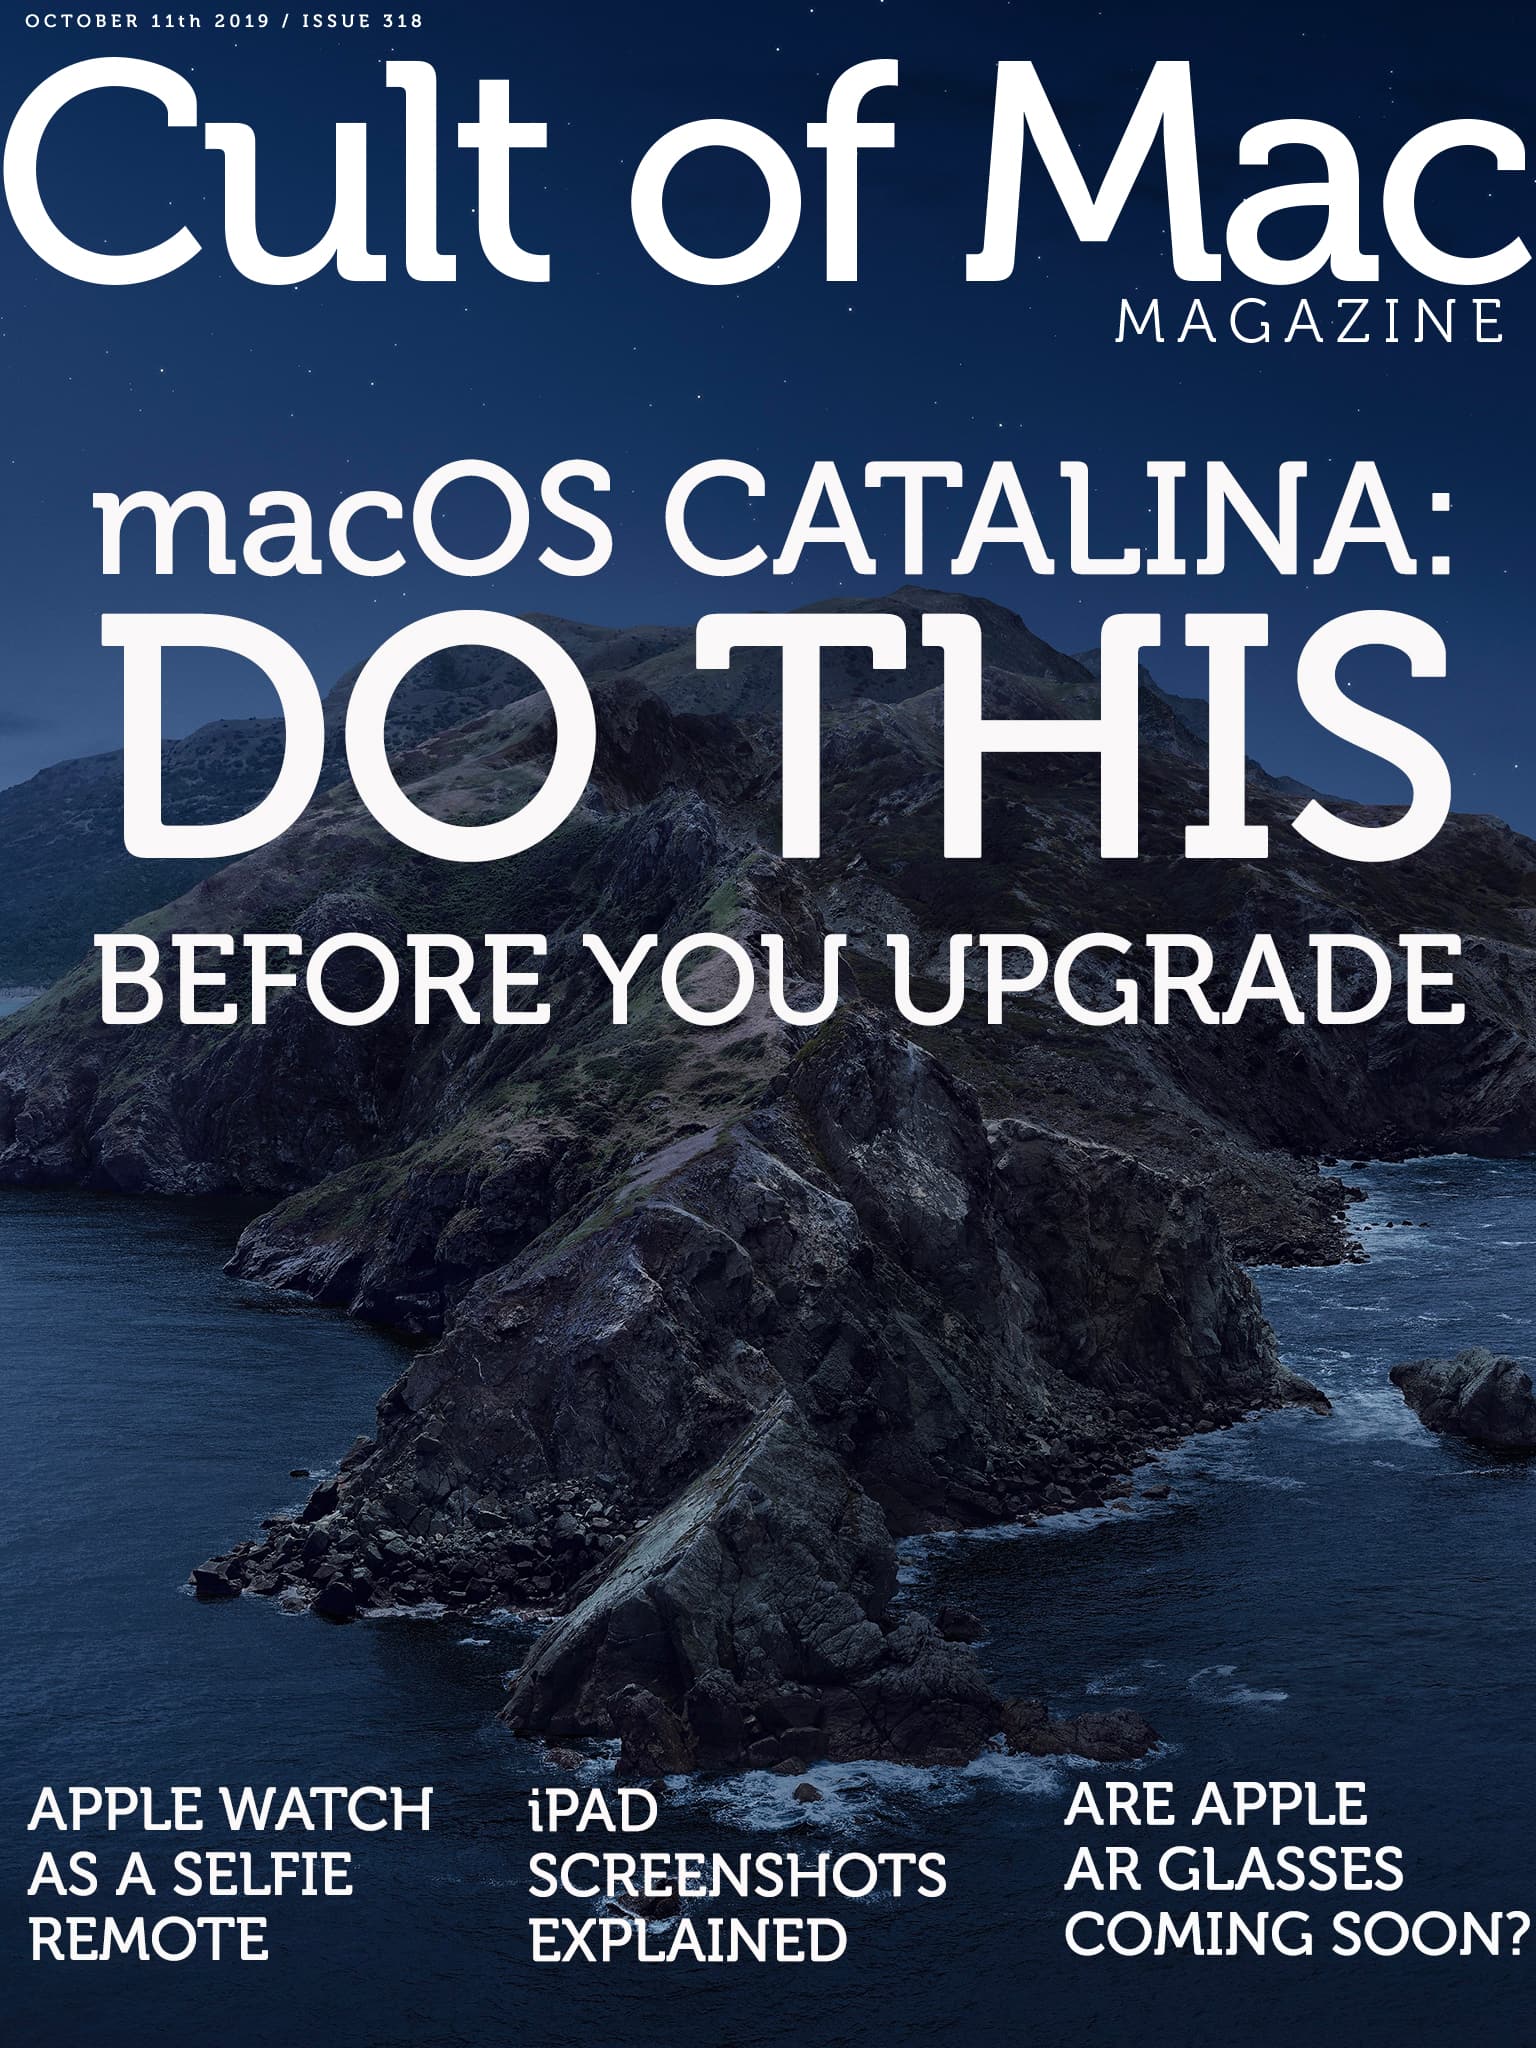 Stop! Don't upgrade your Mac to Catalina until you've done this quick check.